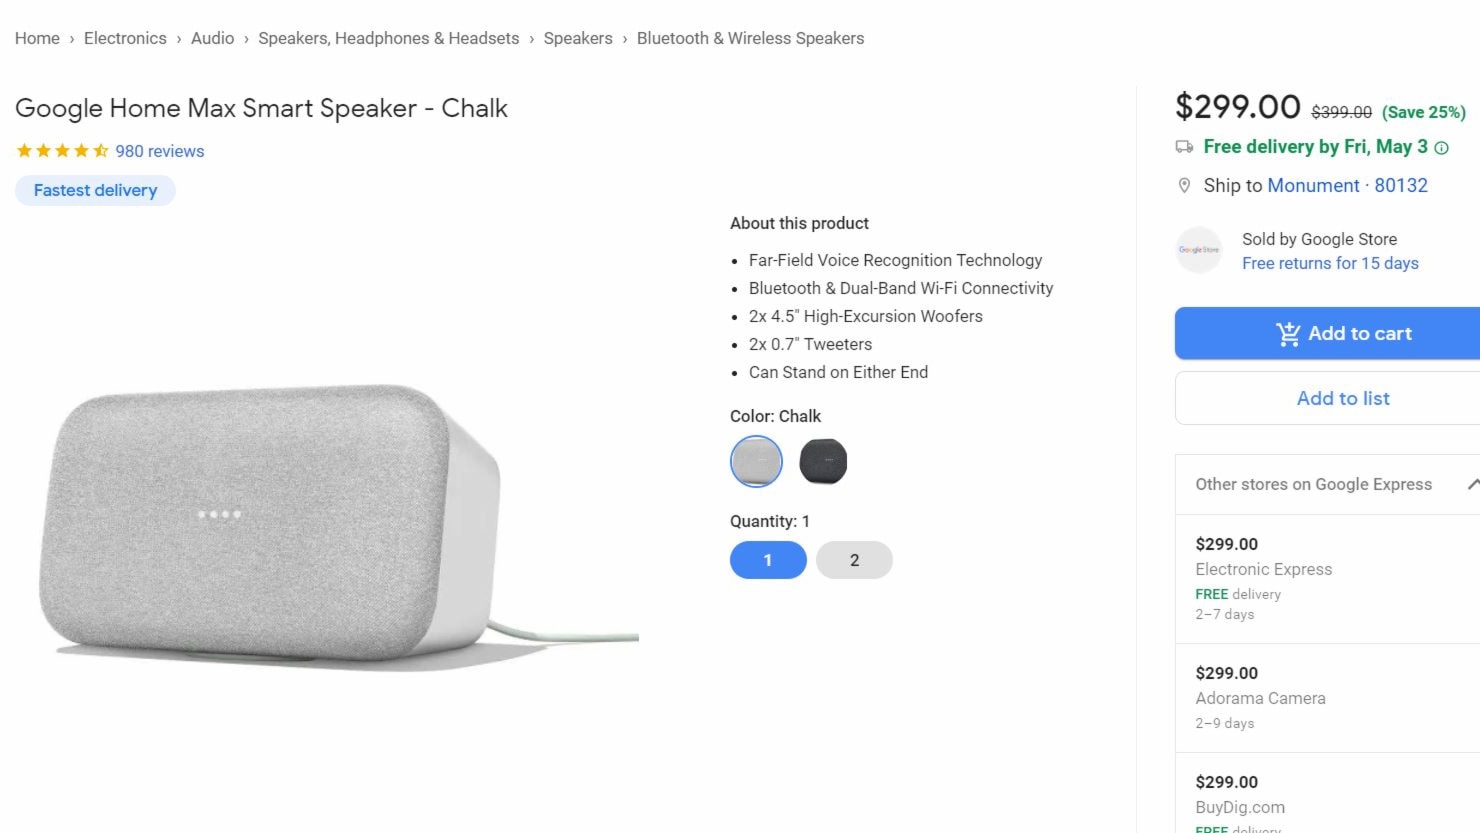 Google Home Max deal on Google Express